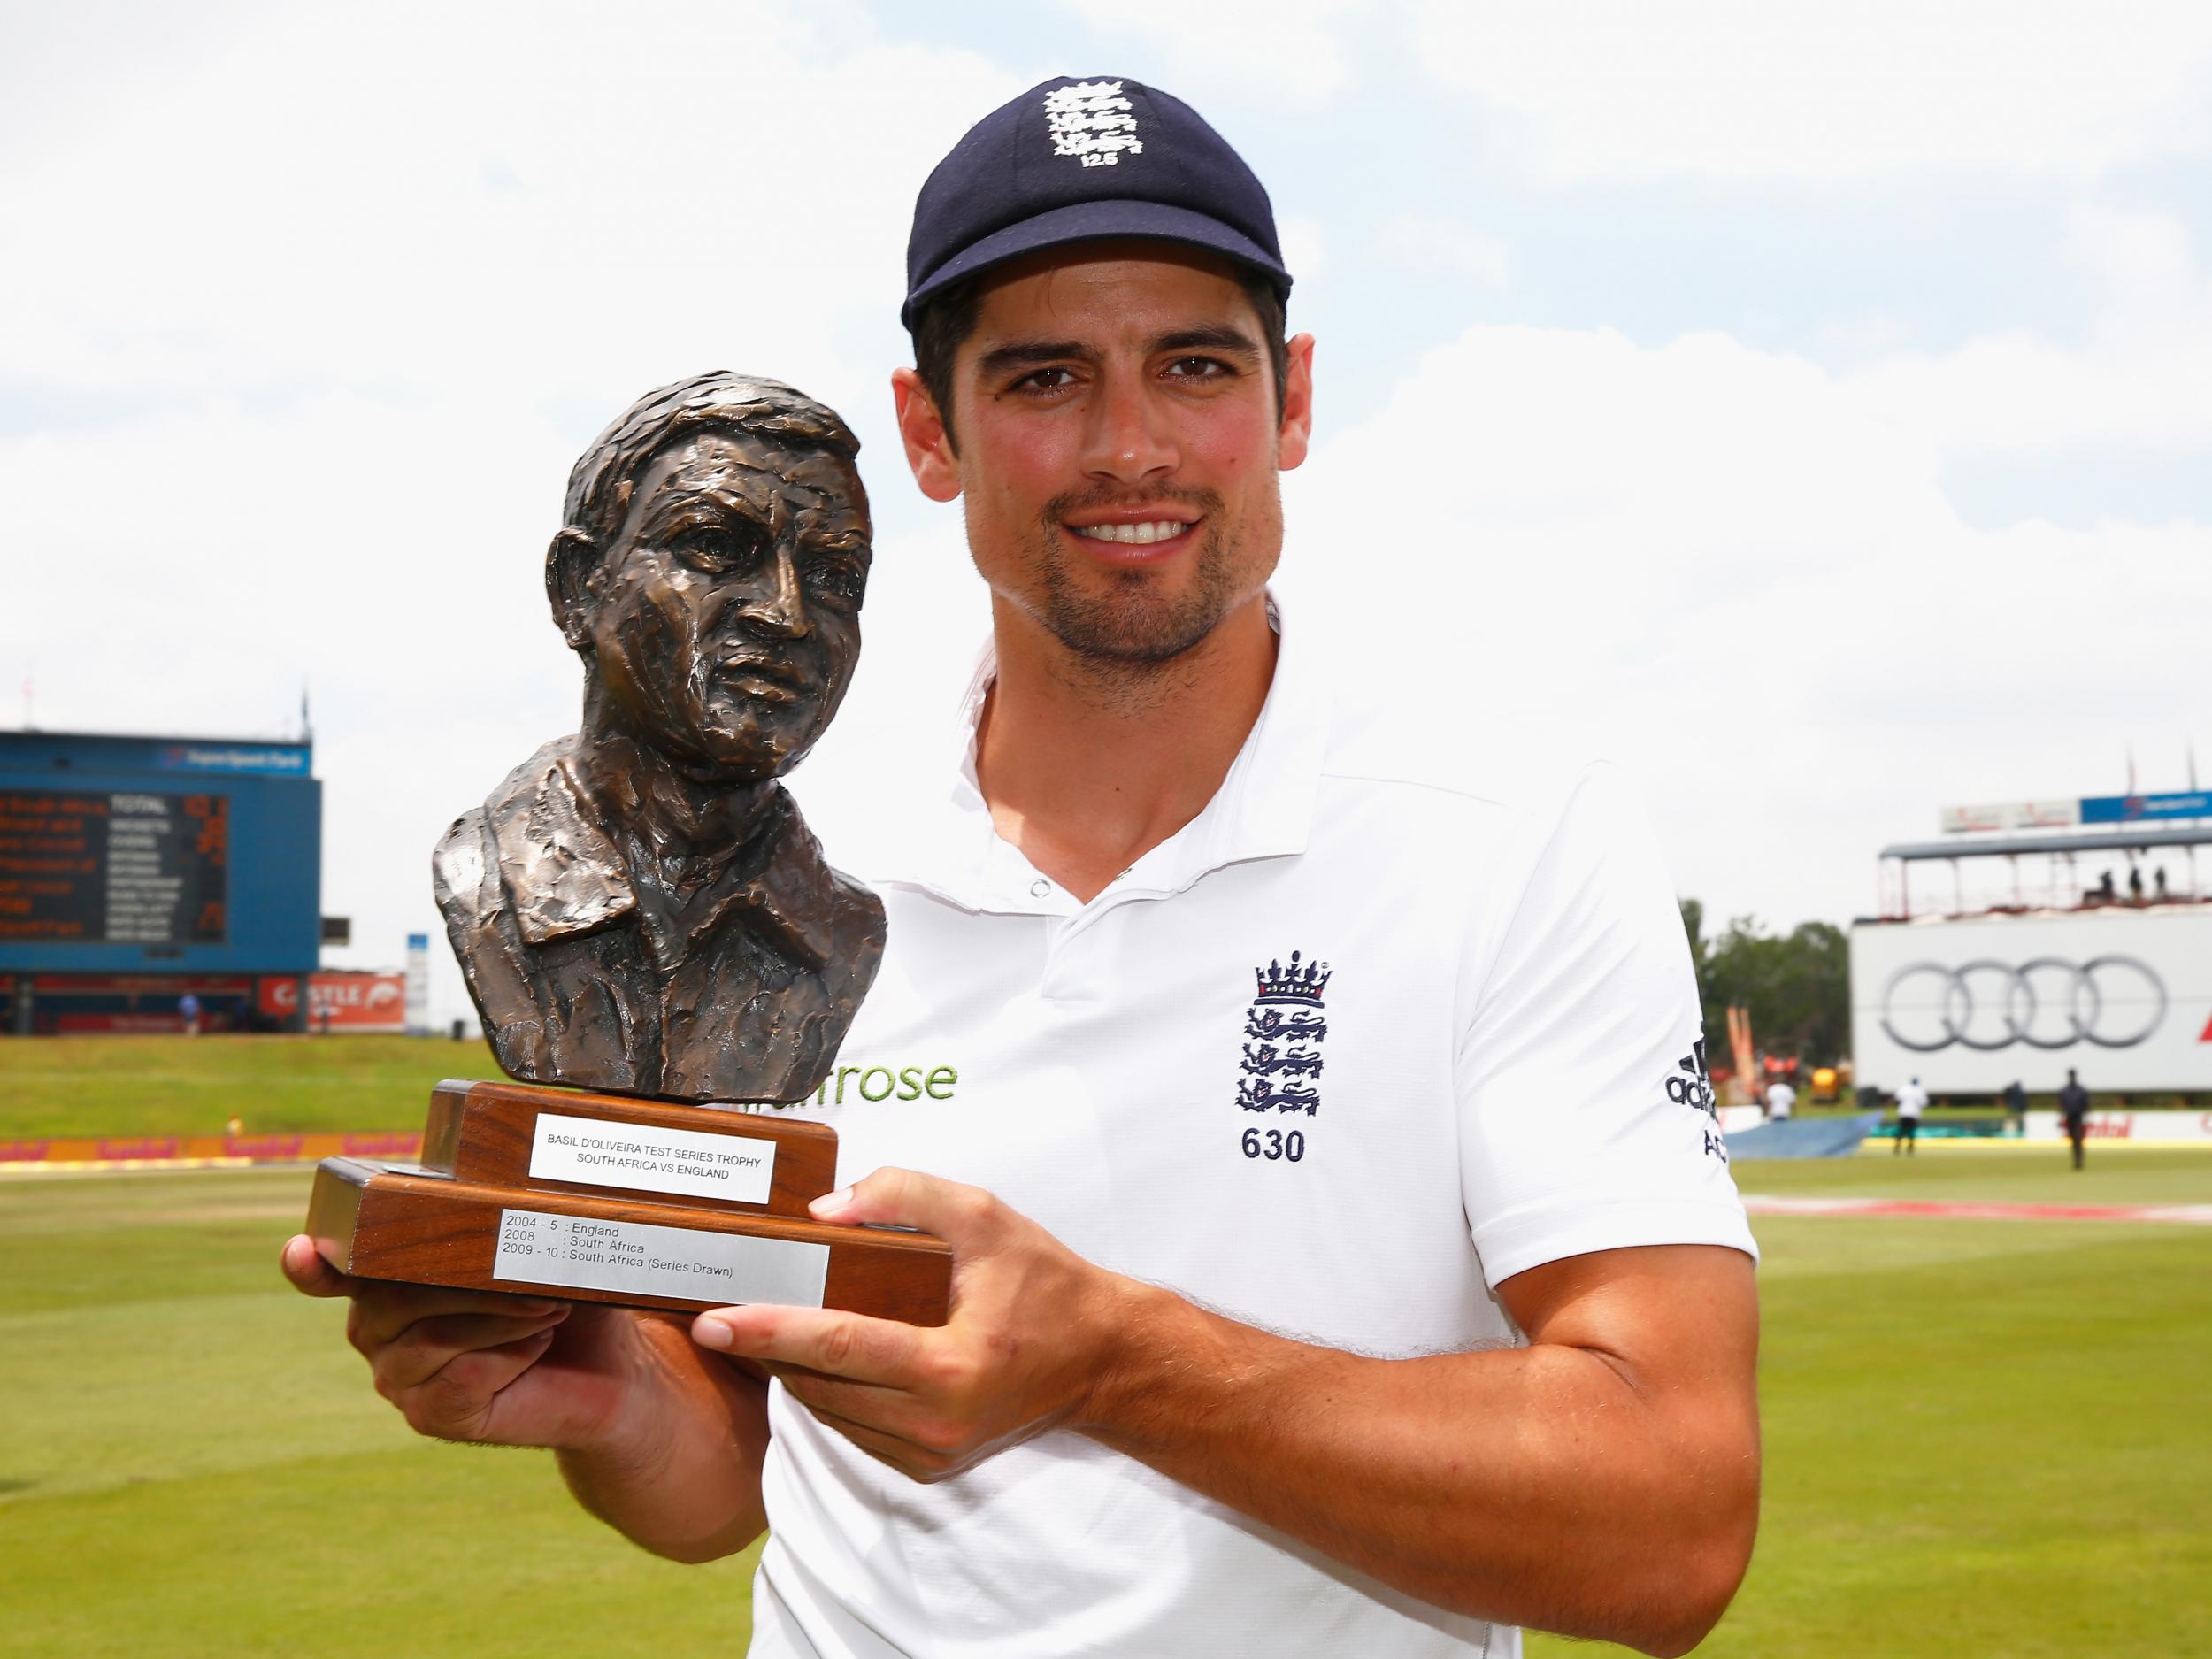 Cook captained England to a series win in South Africa